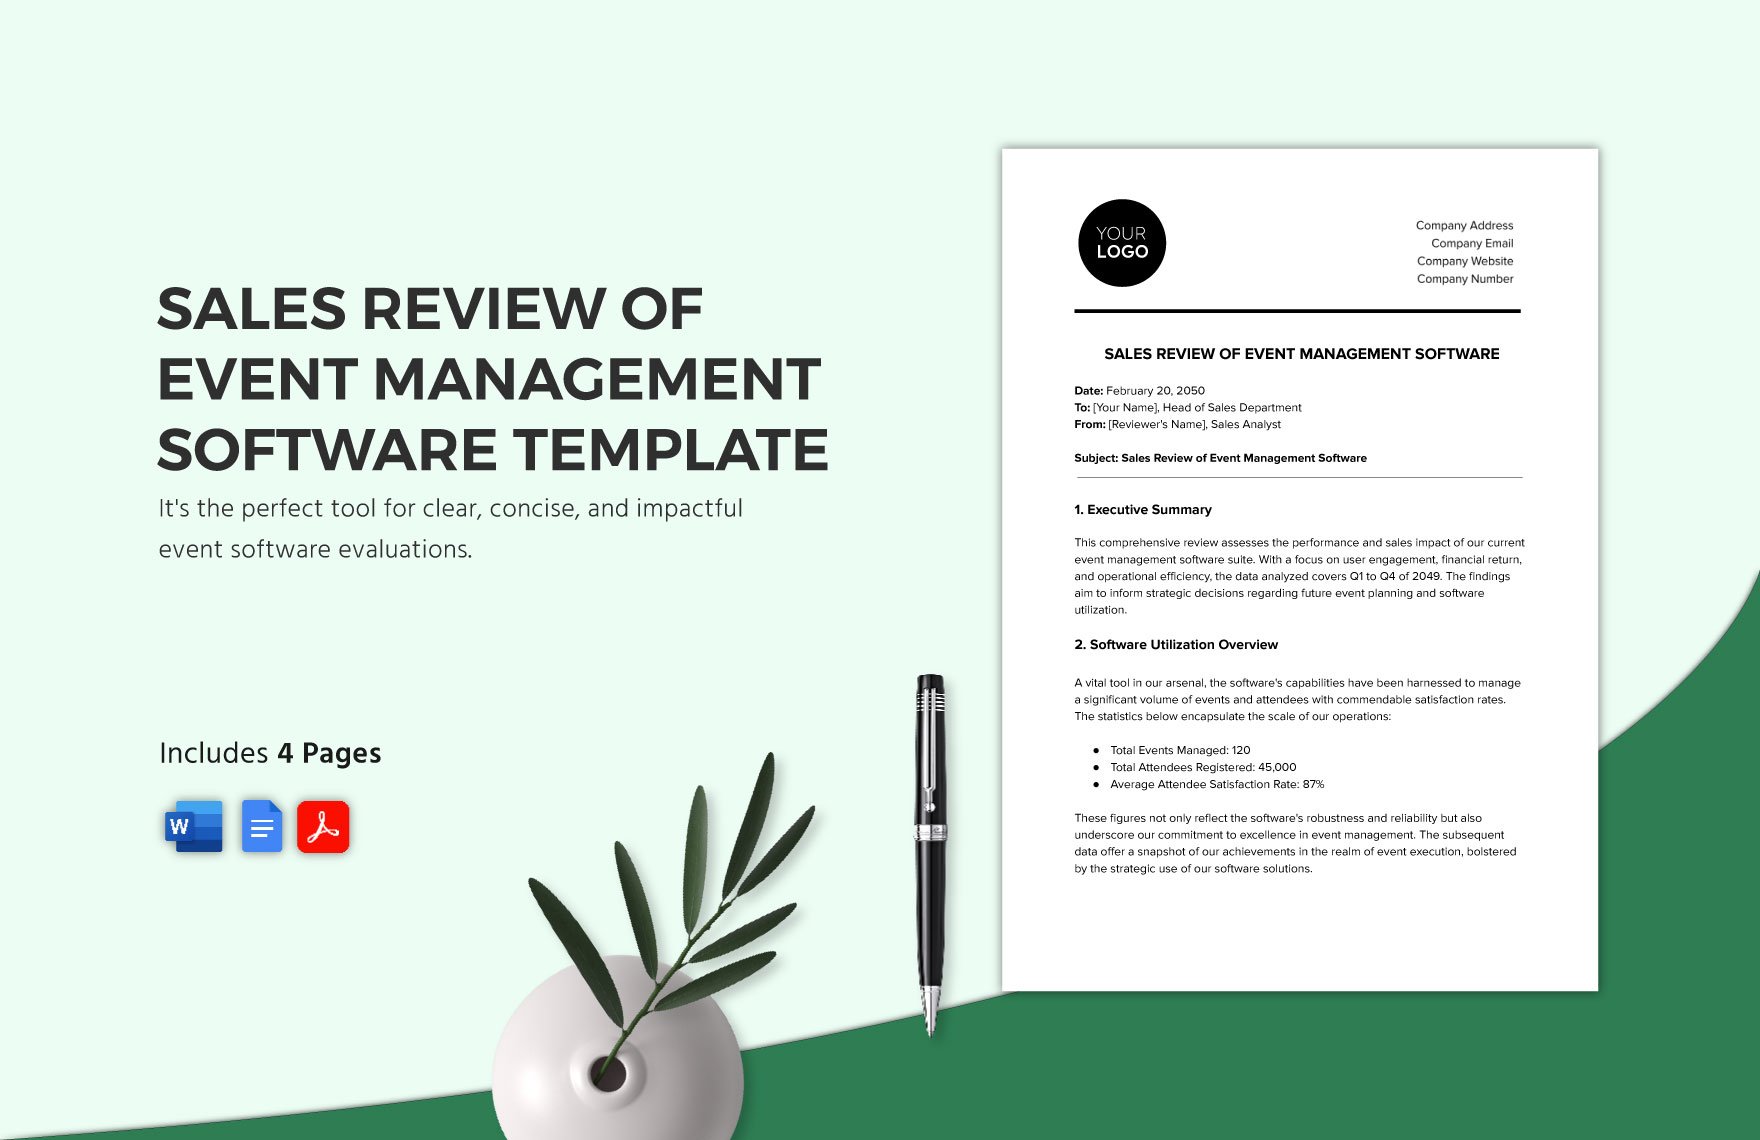 Sales Review of Event Management Software Template